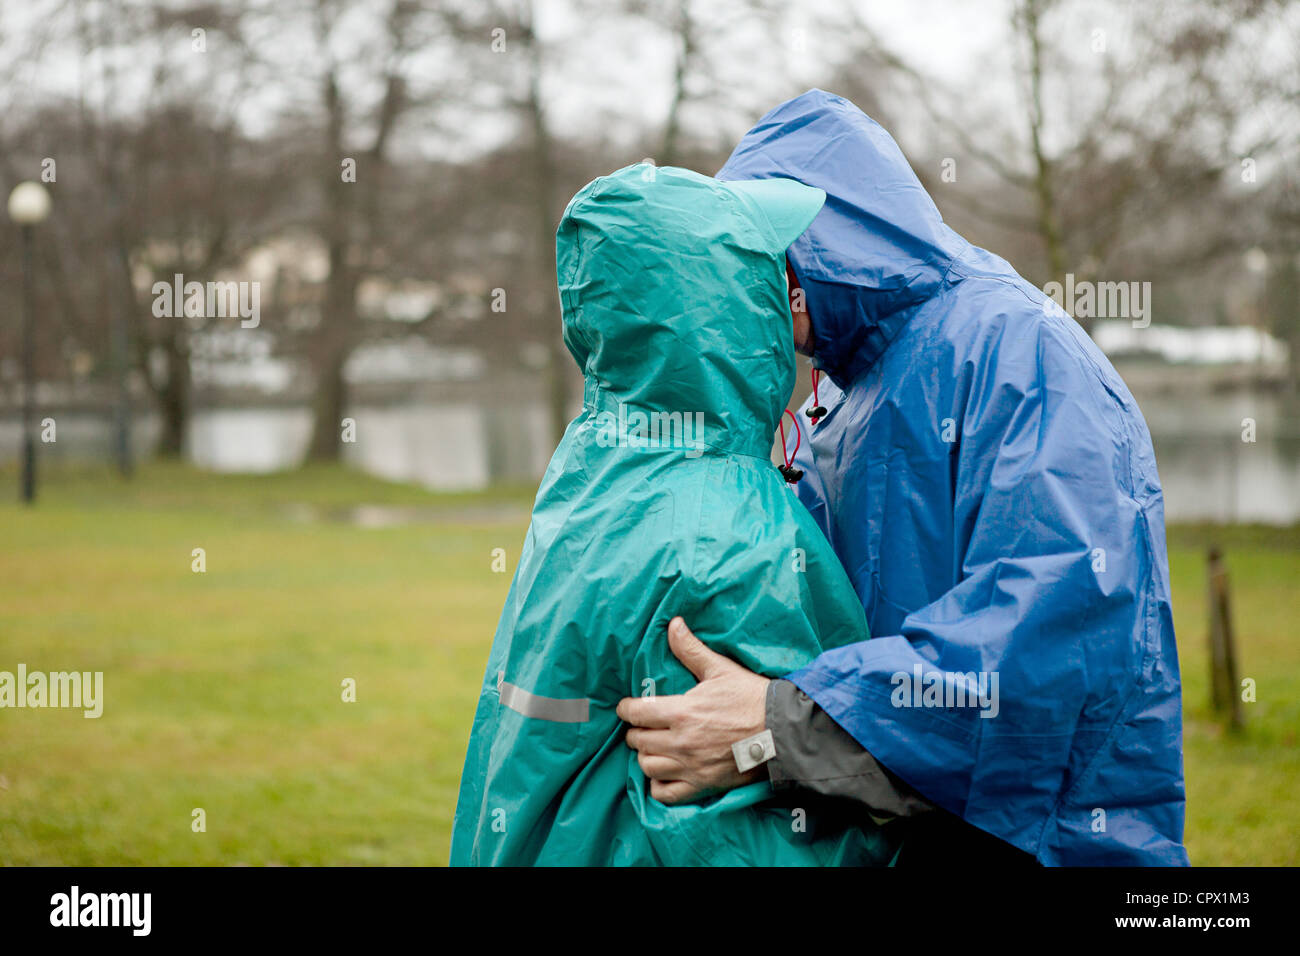 Senior couple in waterproof clothing kissing in park Stock Photo